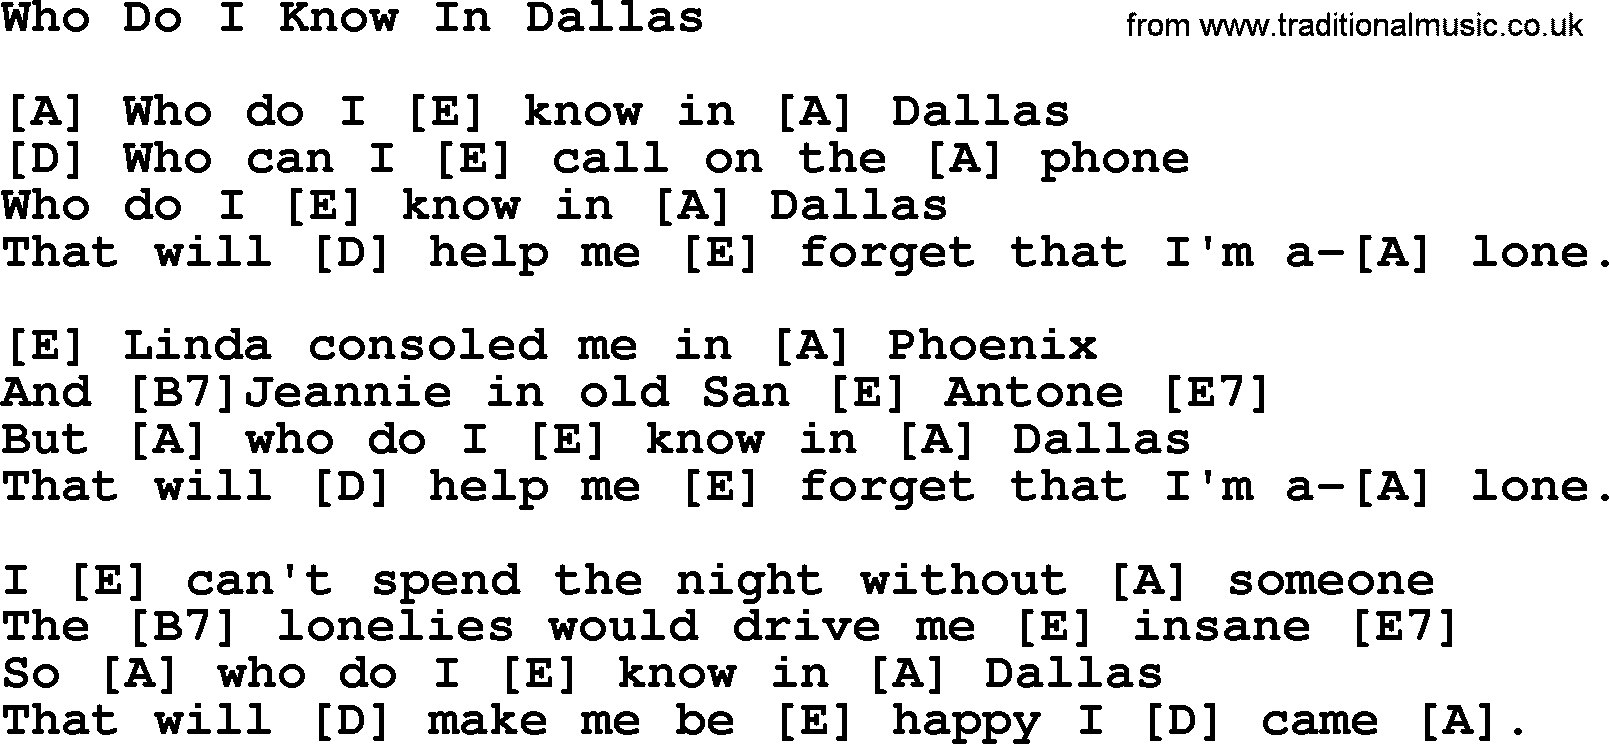 Willie Nelson song: Who Do I Know In Dallas, lyrics and chords